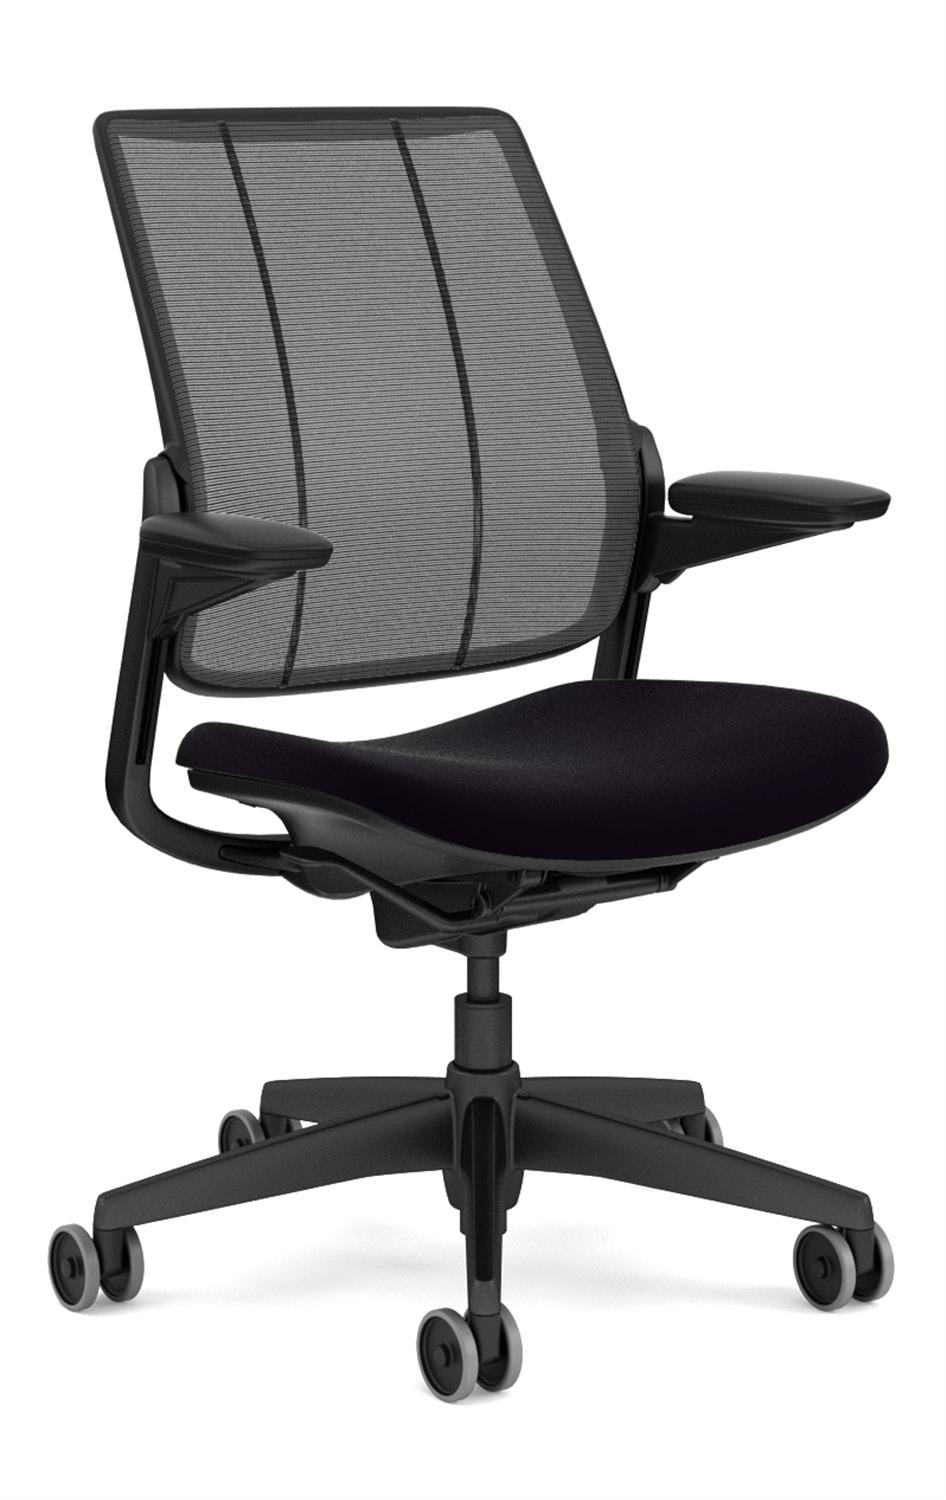 position of the chair for full support throughout movement Pivoting backrest automatically moves with the user throughout the day and